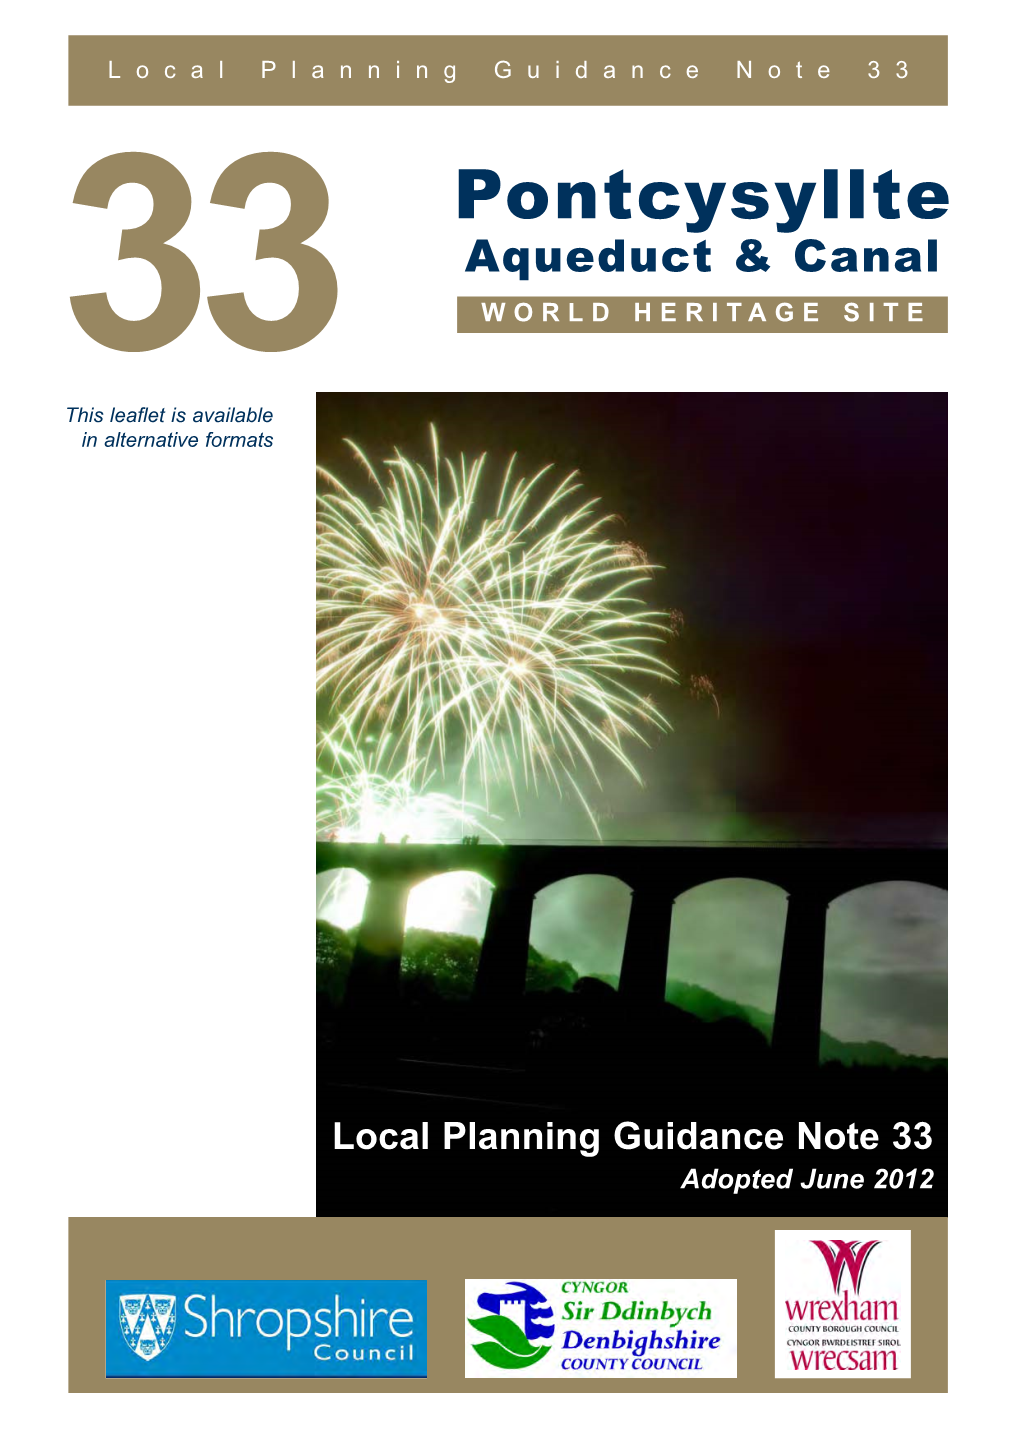 Local Planning Guidance Note 33